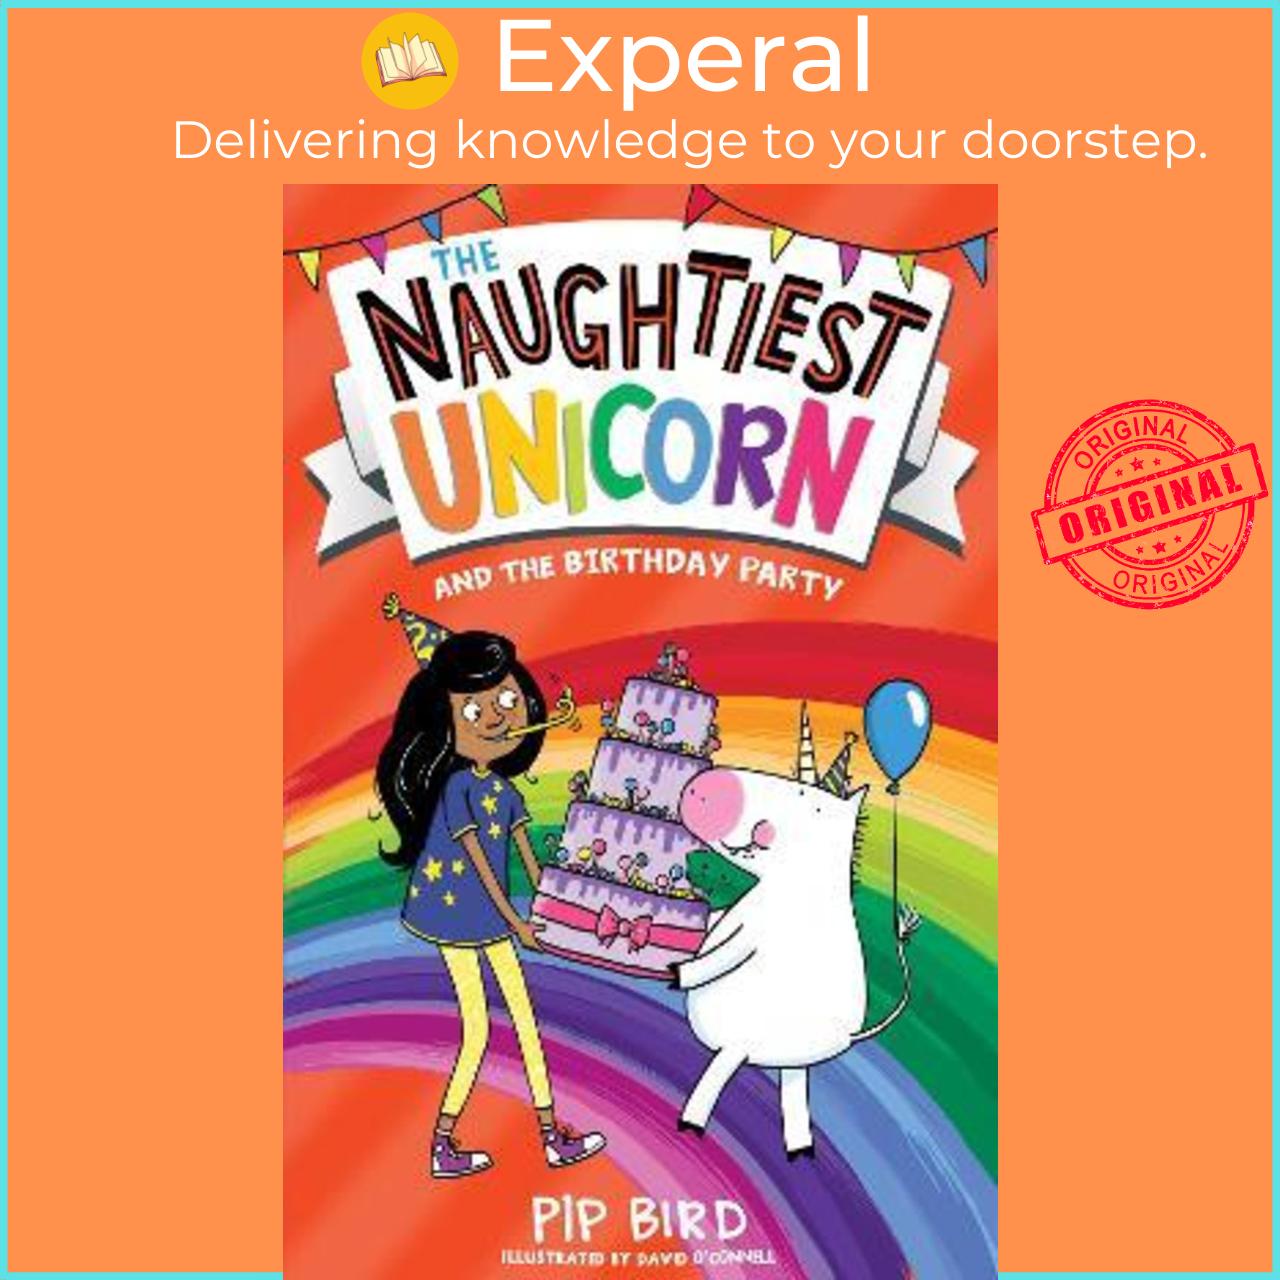 Sách - The Naughtiest Unicorn and the Birthday Party by Pip Bird (UK edition, paperback)